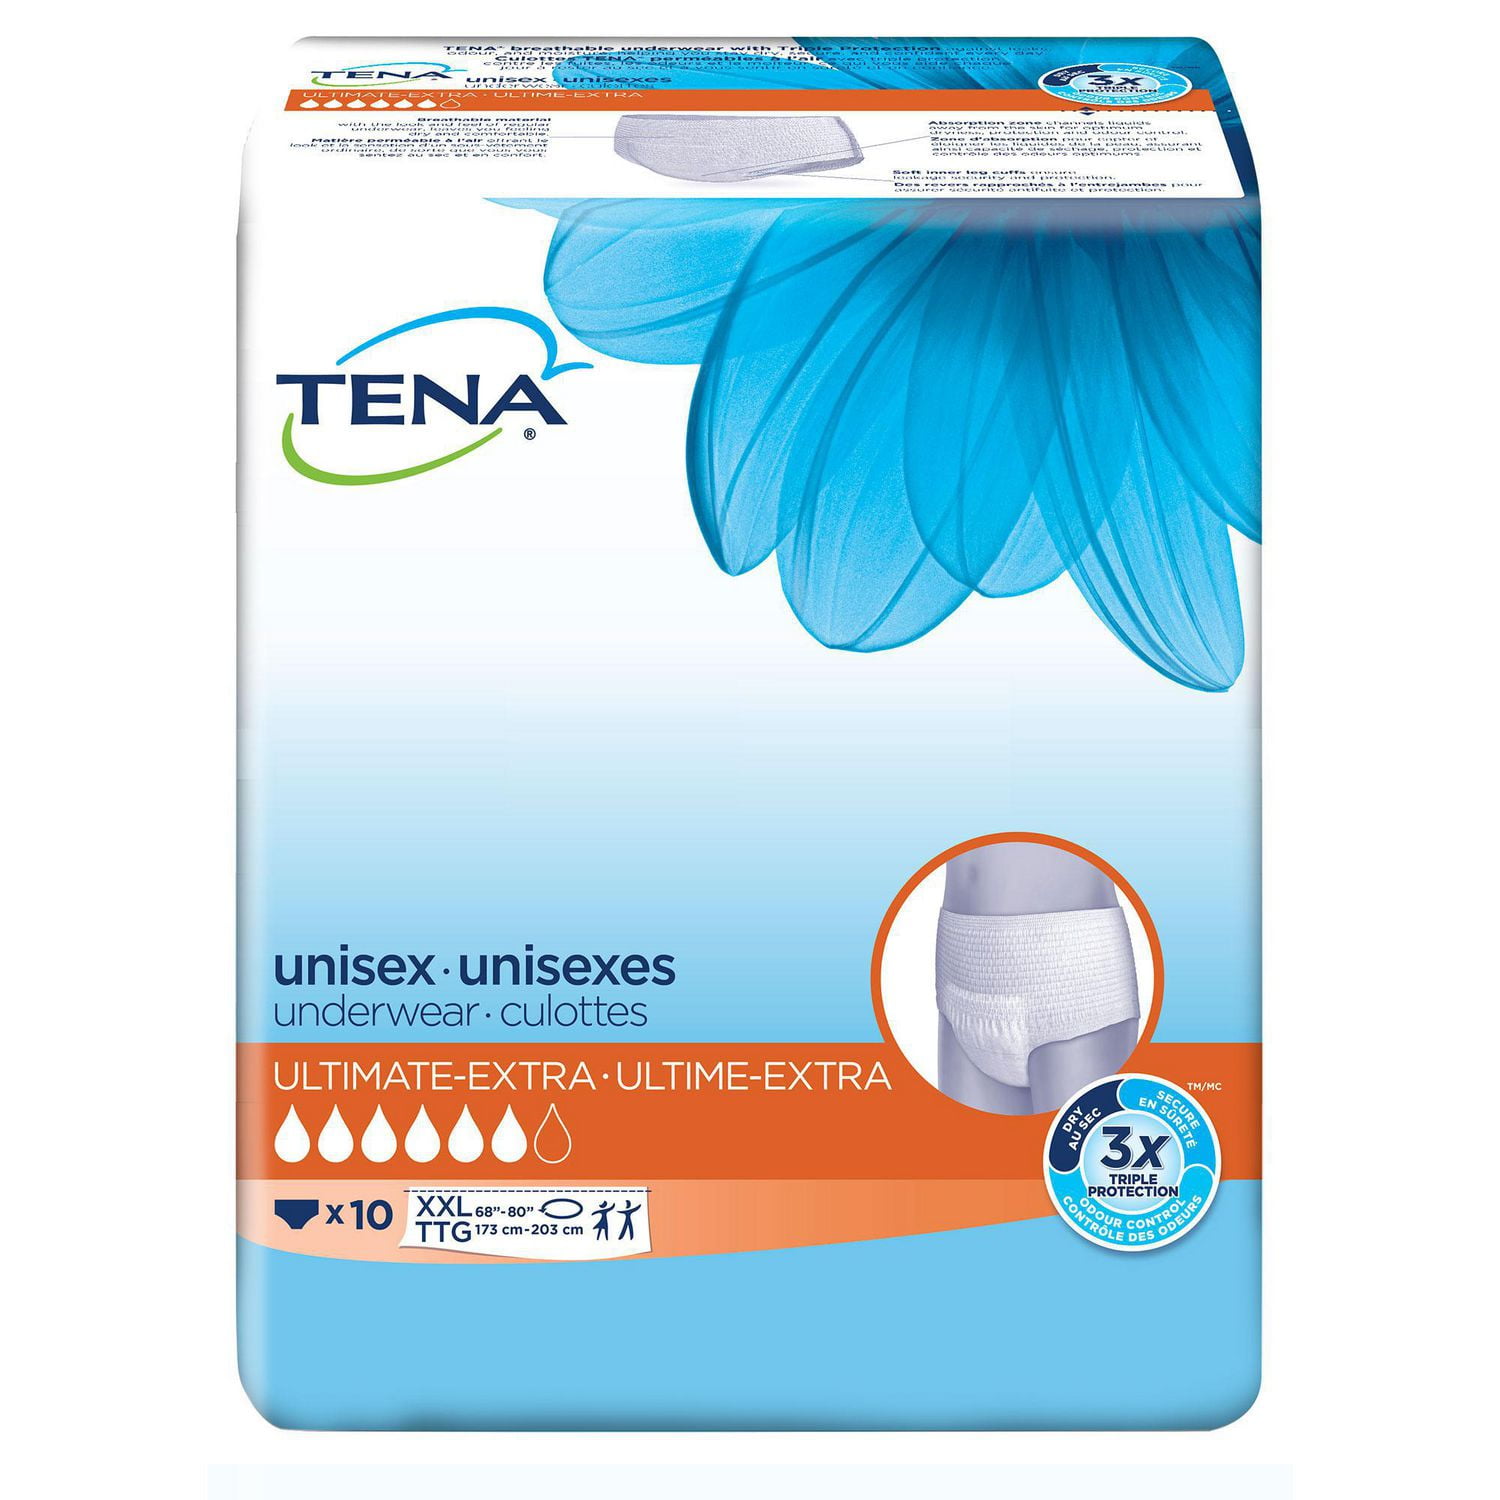 TENA Incontinence Underwear, Ultimate, 2X-Large, 10 Count, 2Xlarge  (173-203cm) 